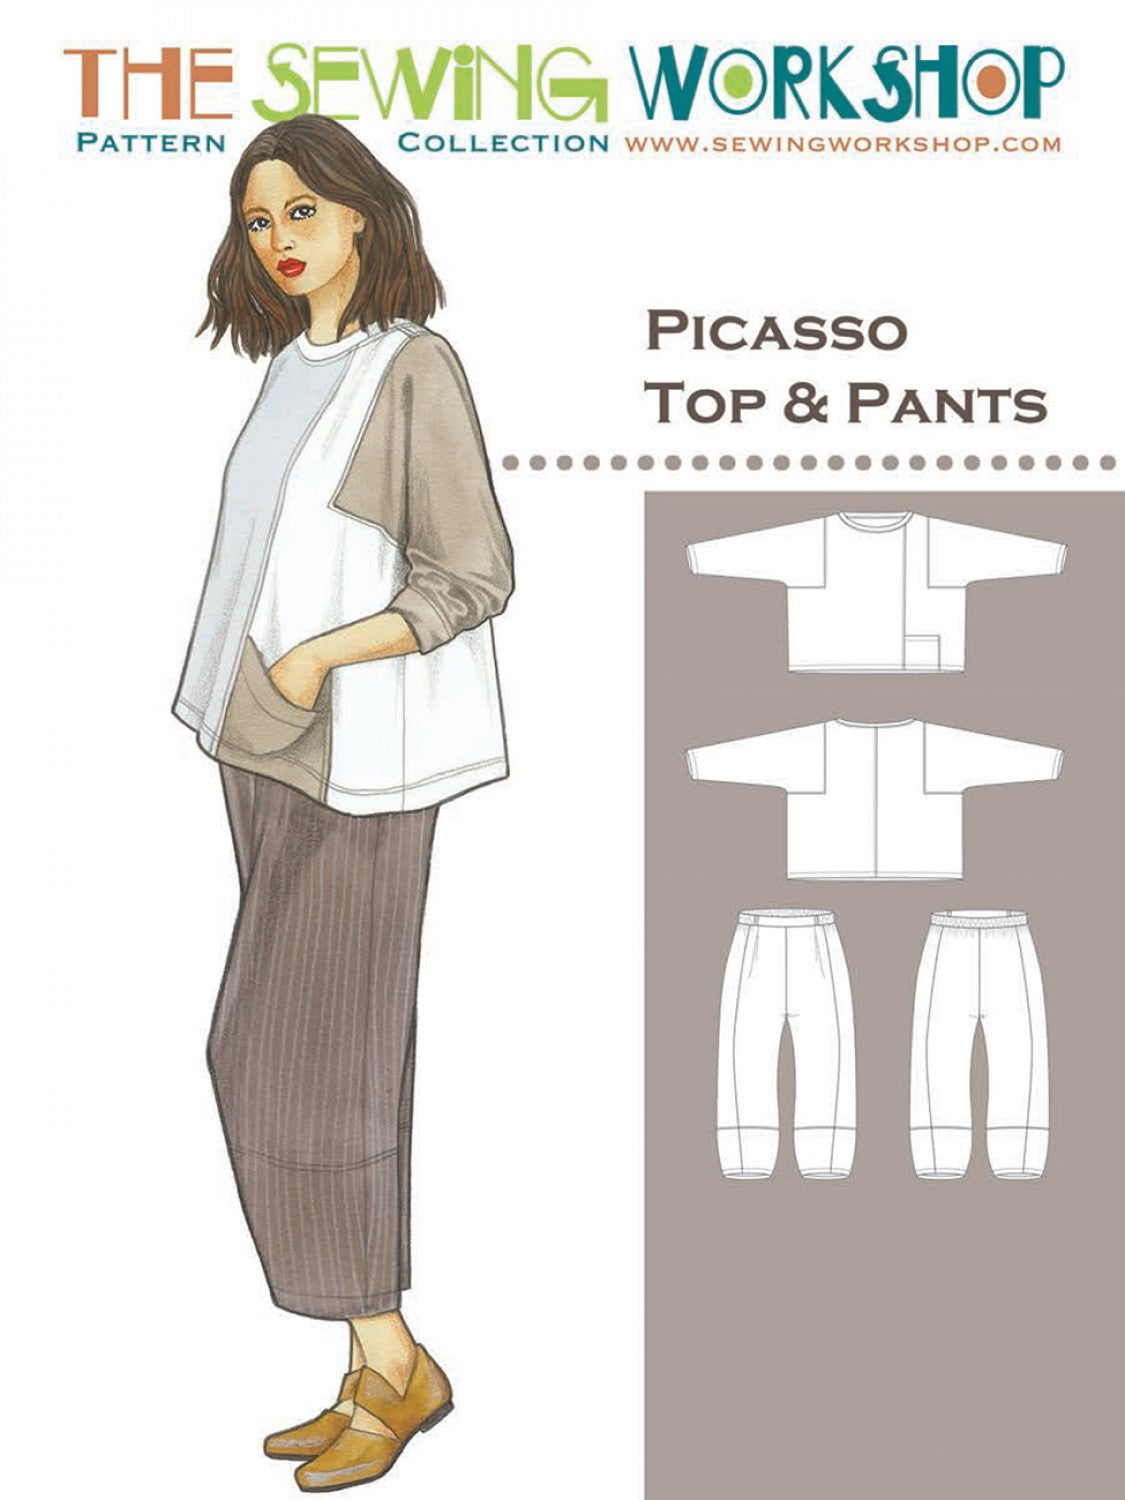 Picasso Top and Pants Pattern by The Sewing Workshop